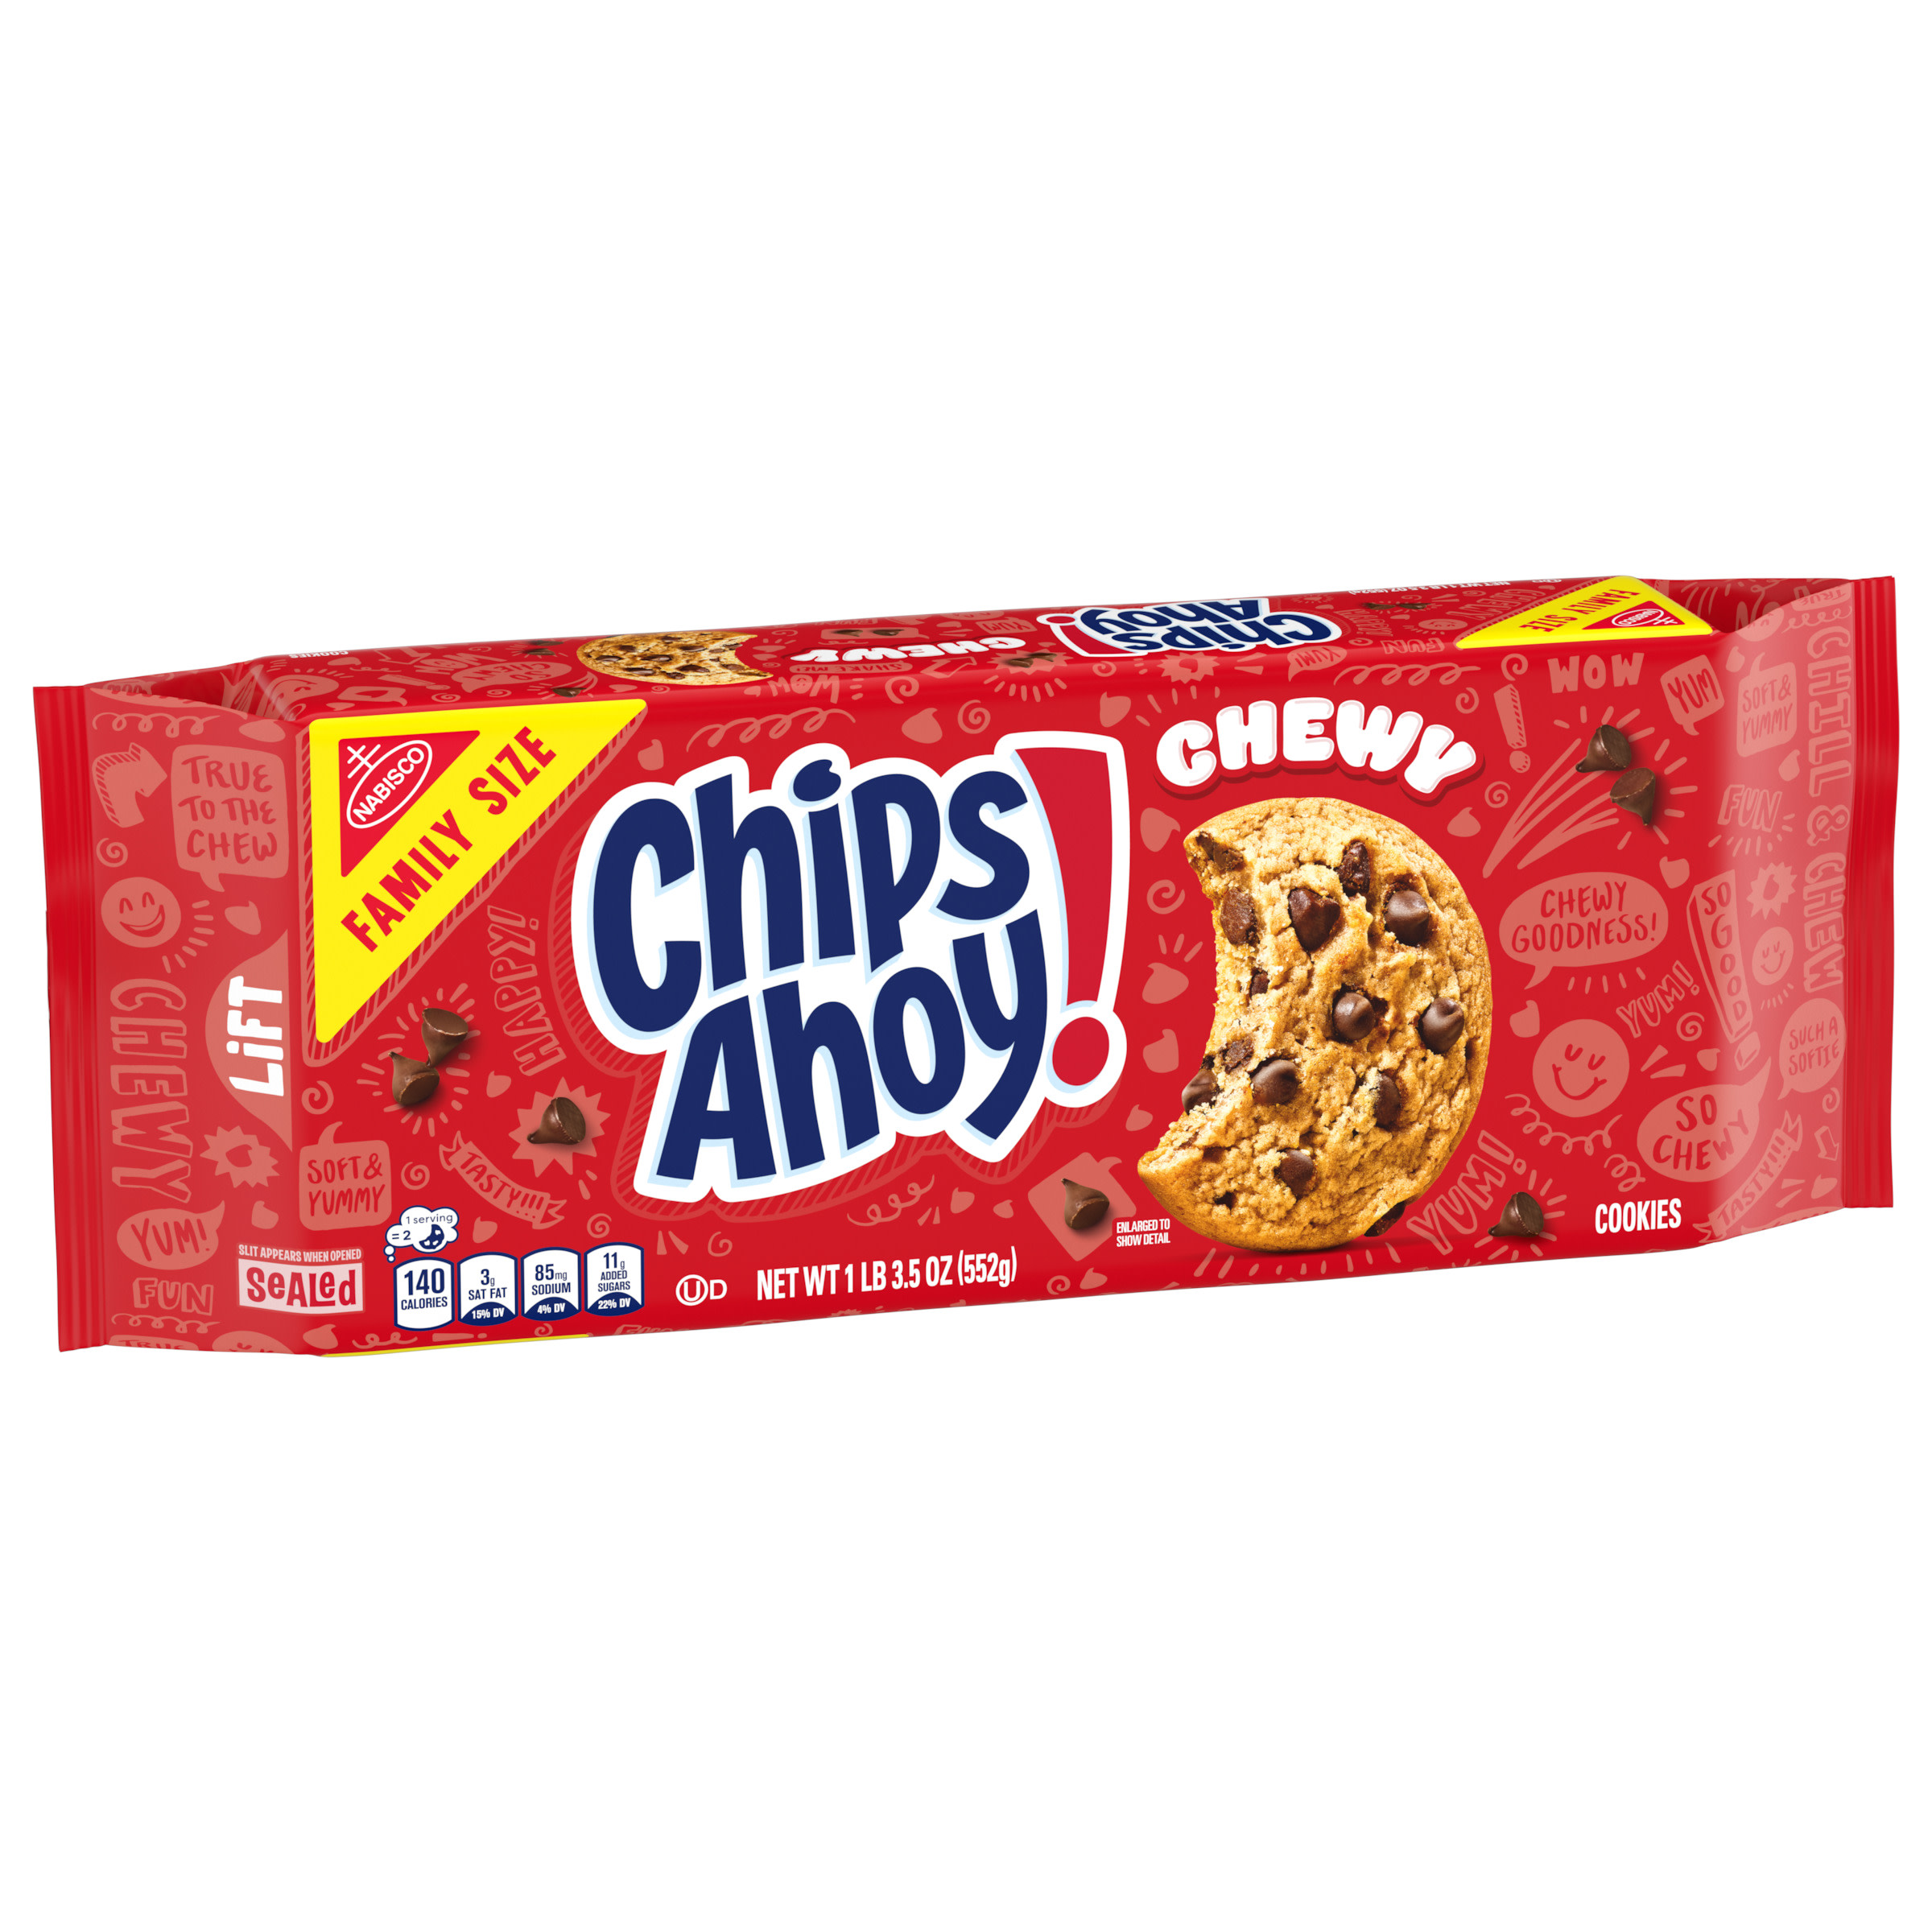 CHIPS AHOY! Chewy Chocolate Chip Cookies, Family Size, 19.5 oz - image 3 of 15